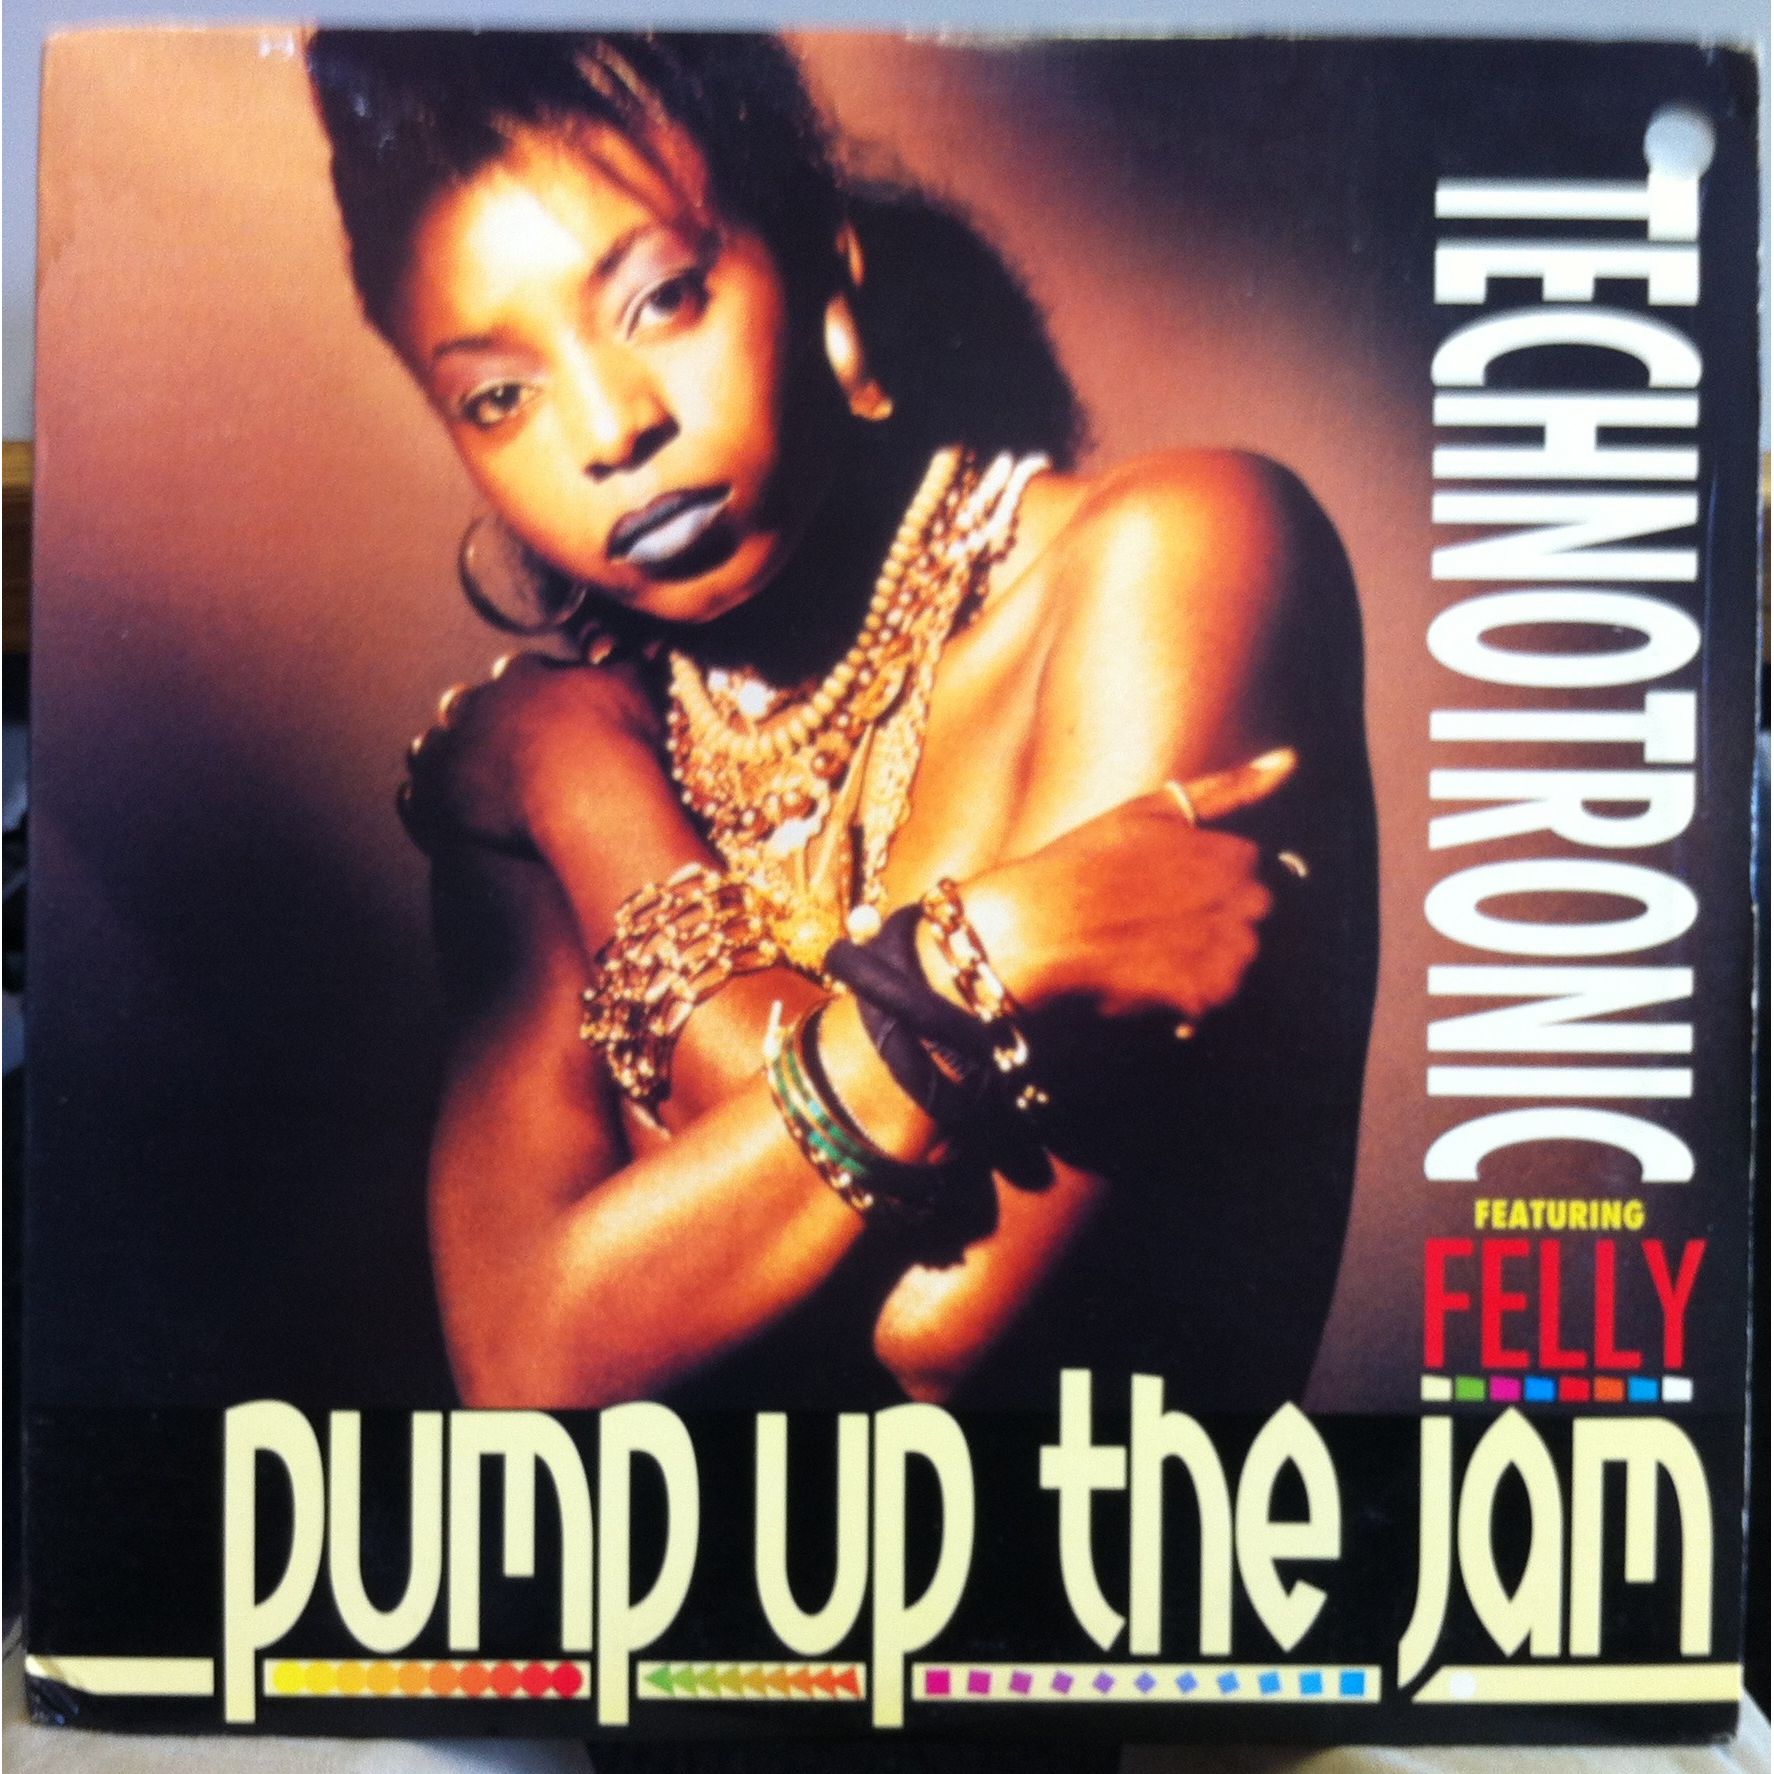 Pump-Up-The-Jam-Limited-Edition-cover